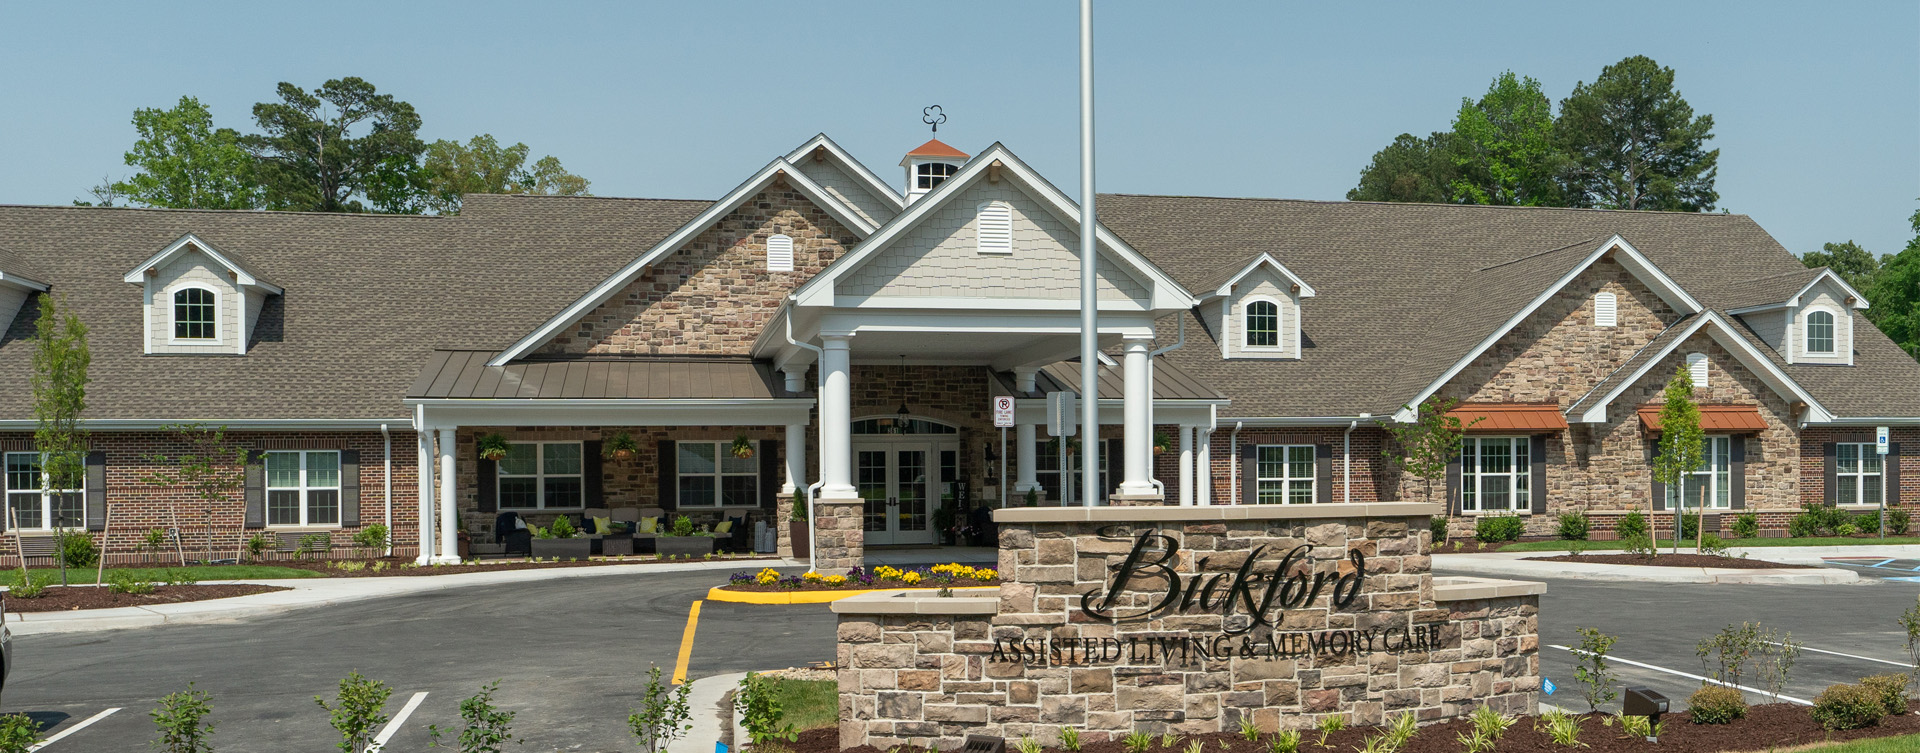 Stop by and visit us at  Bickford of Chesapeake